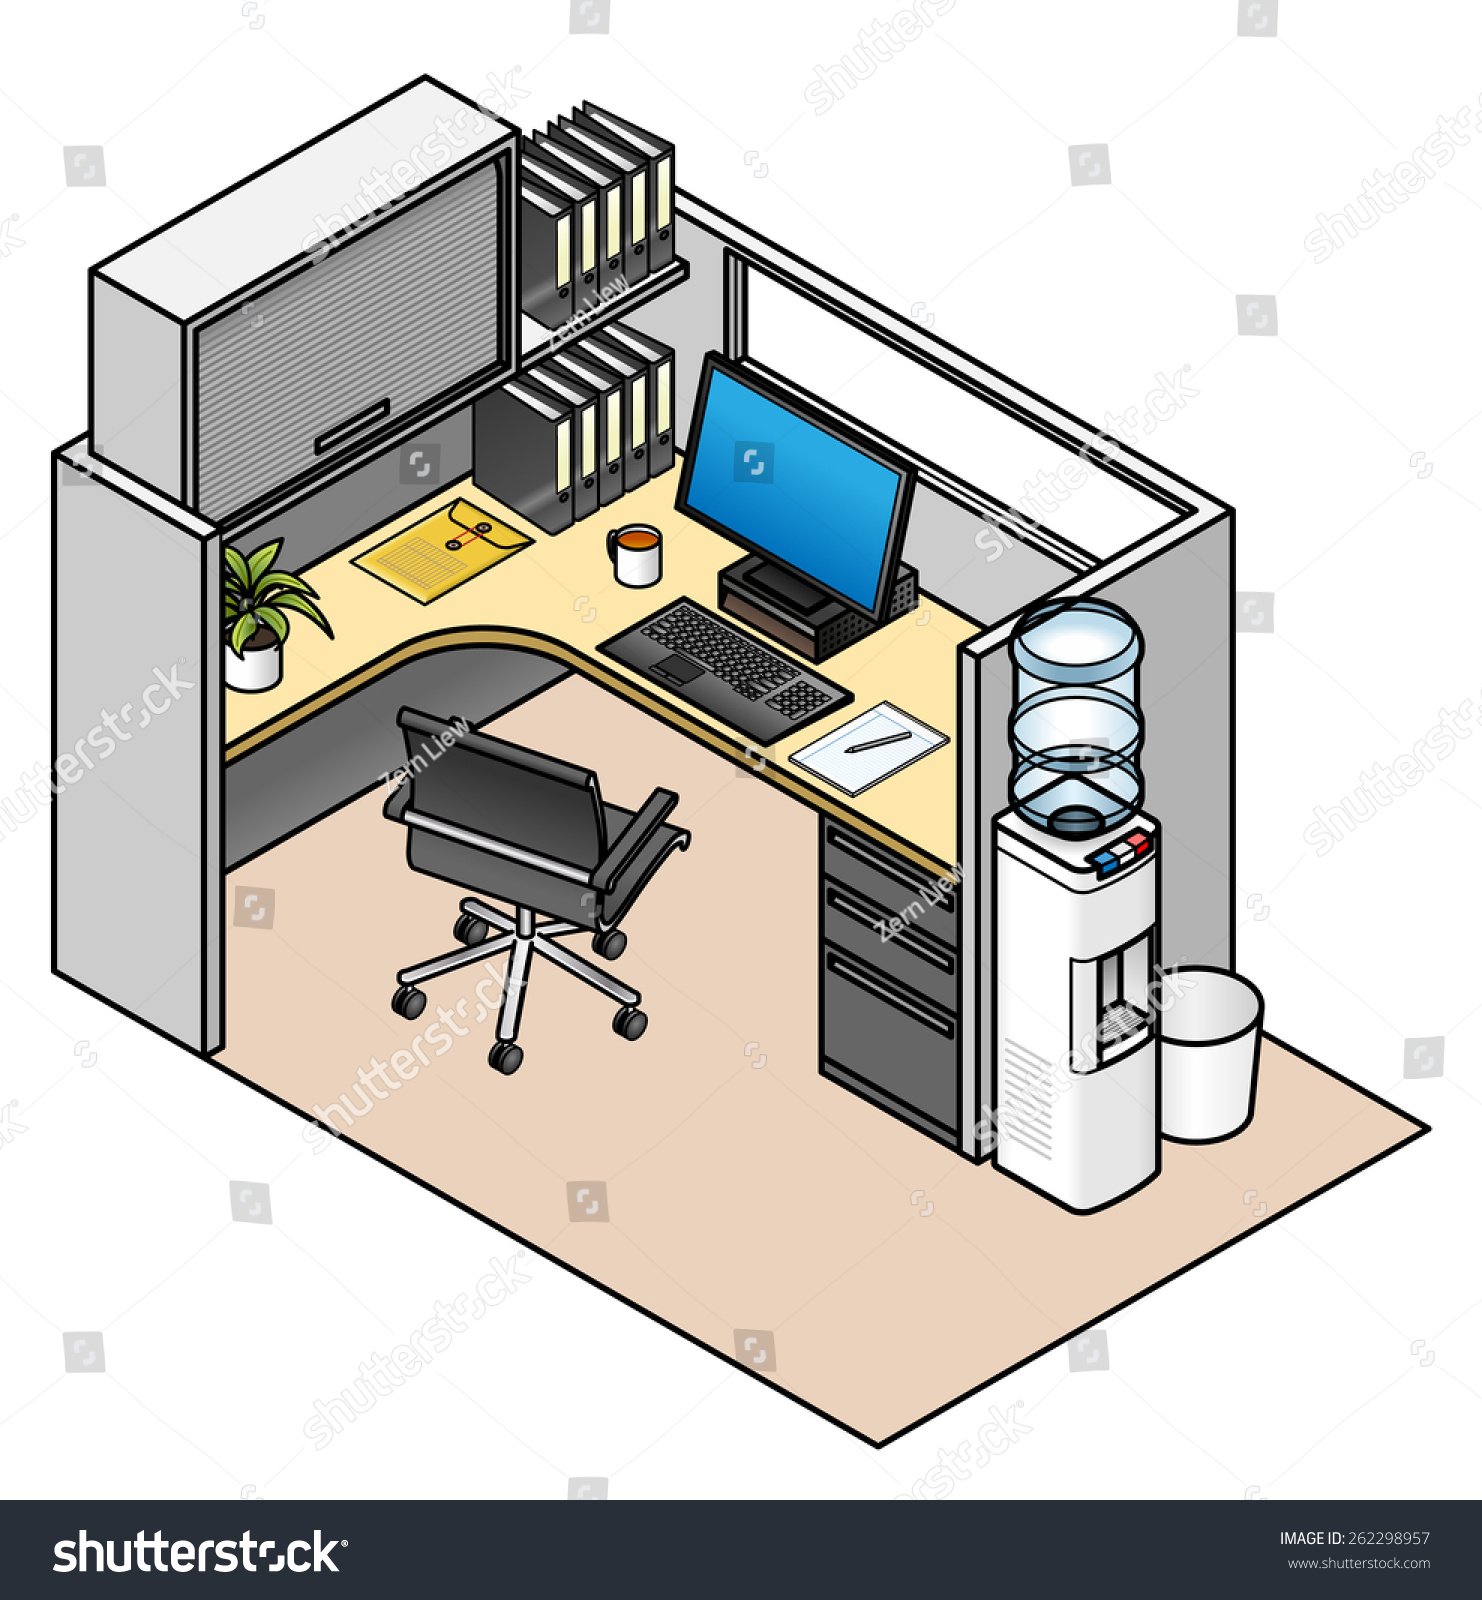 office clipart download full - photo #41